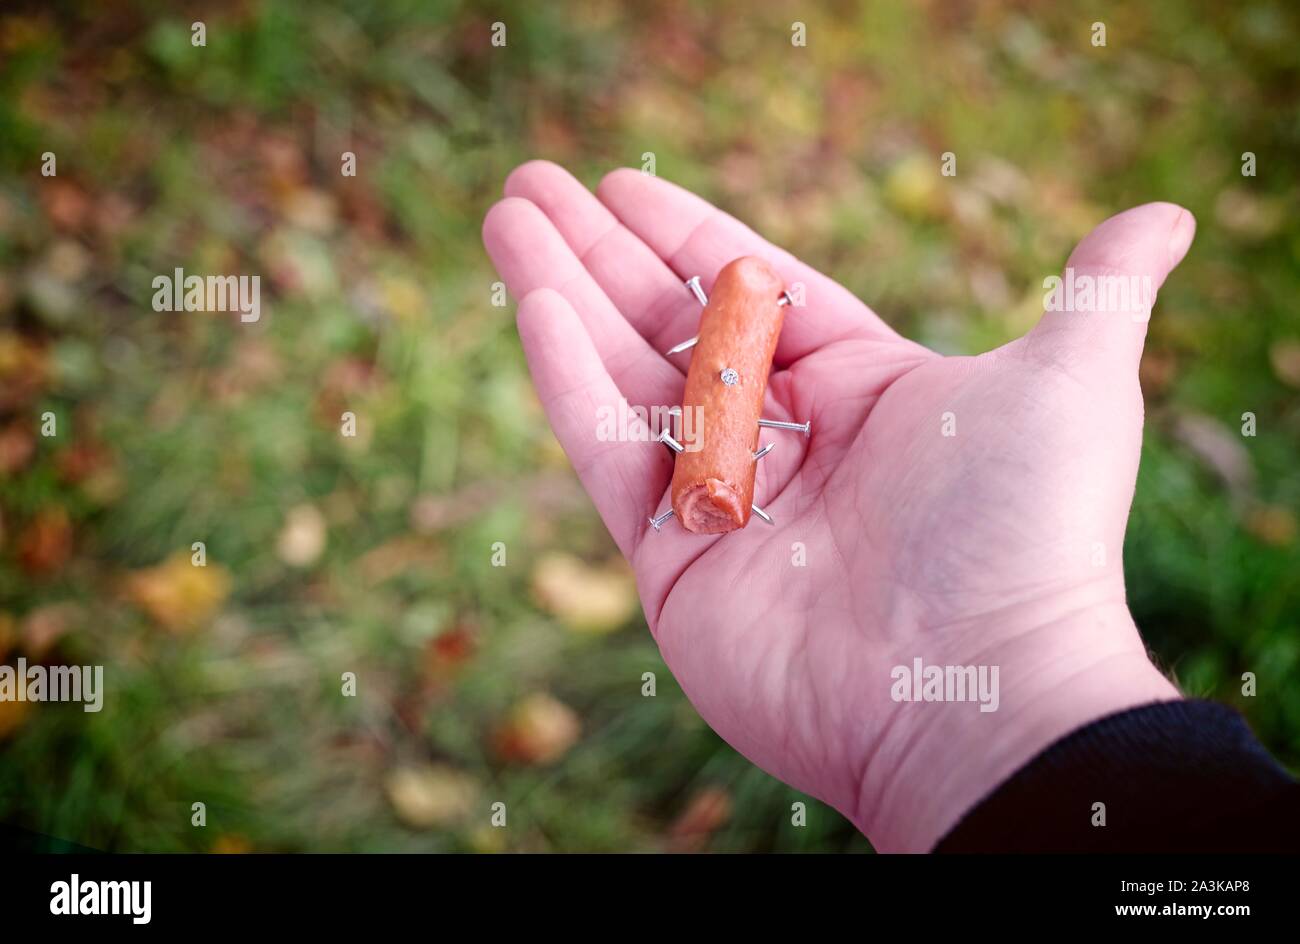 Unrecognizable person is holding a sausage spiked with nails. Toxic bait. Stock Photo